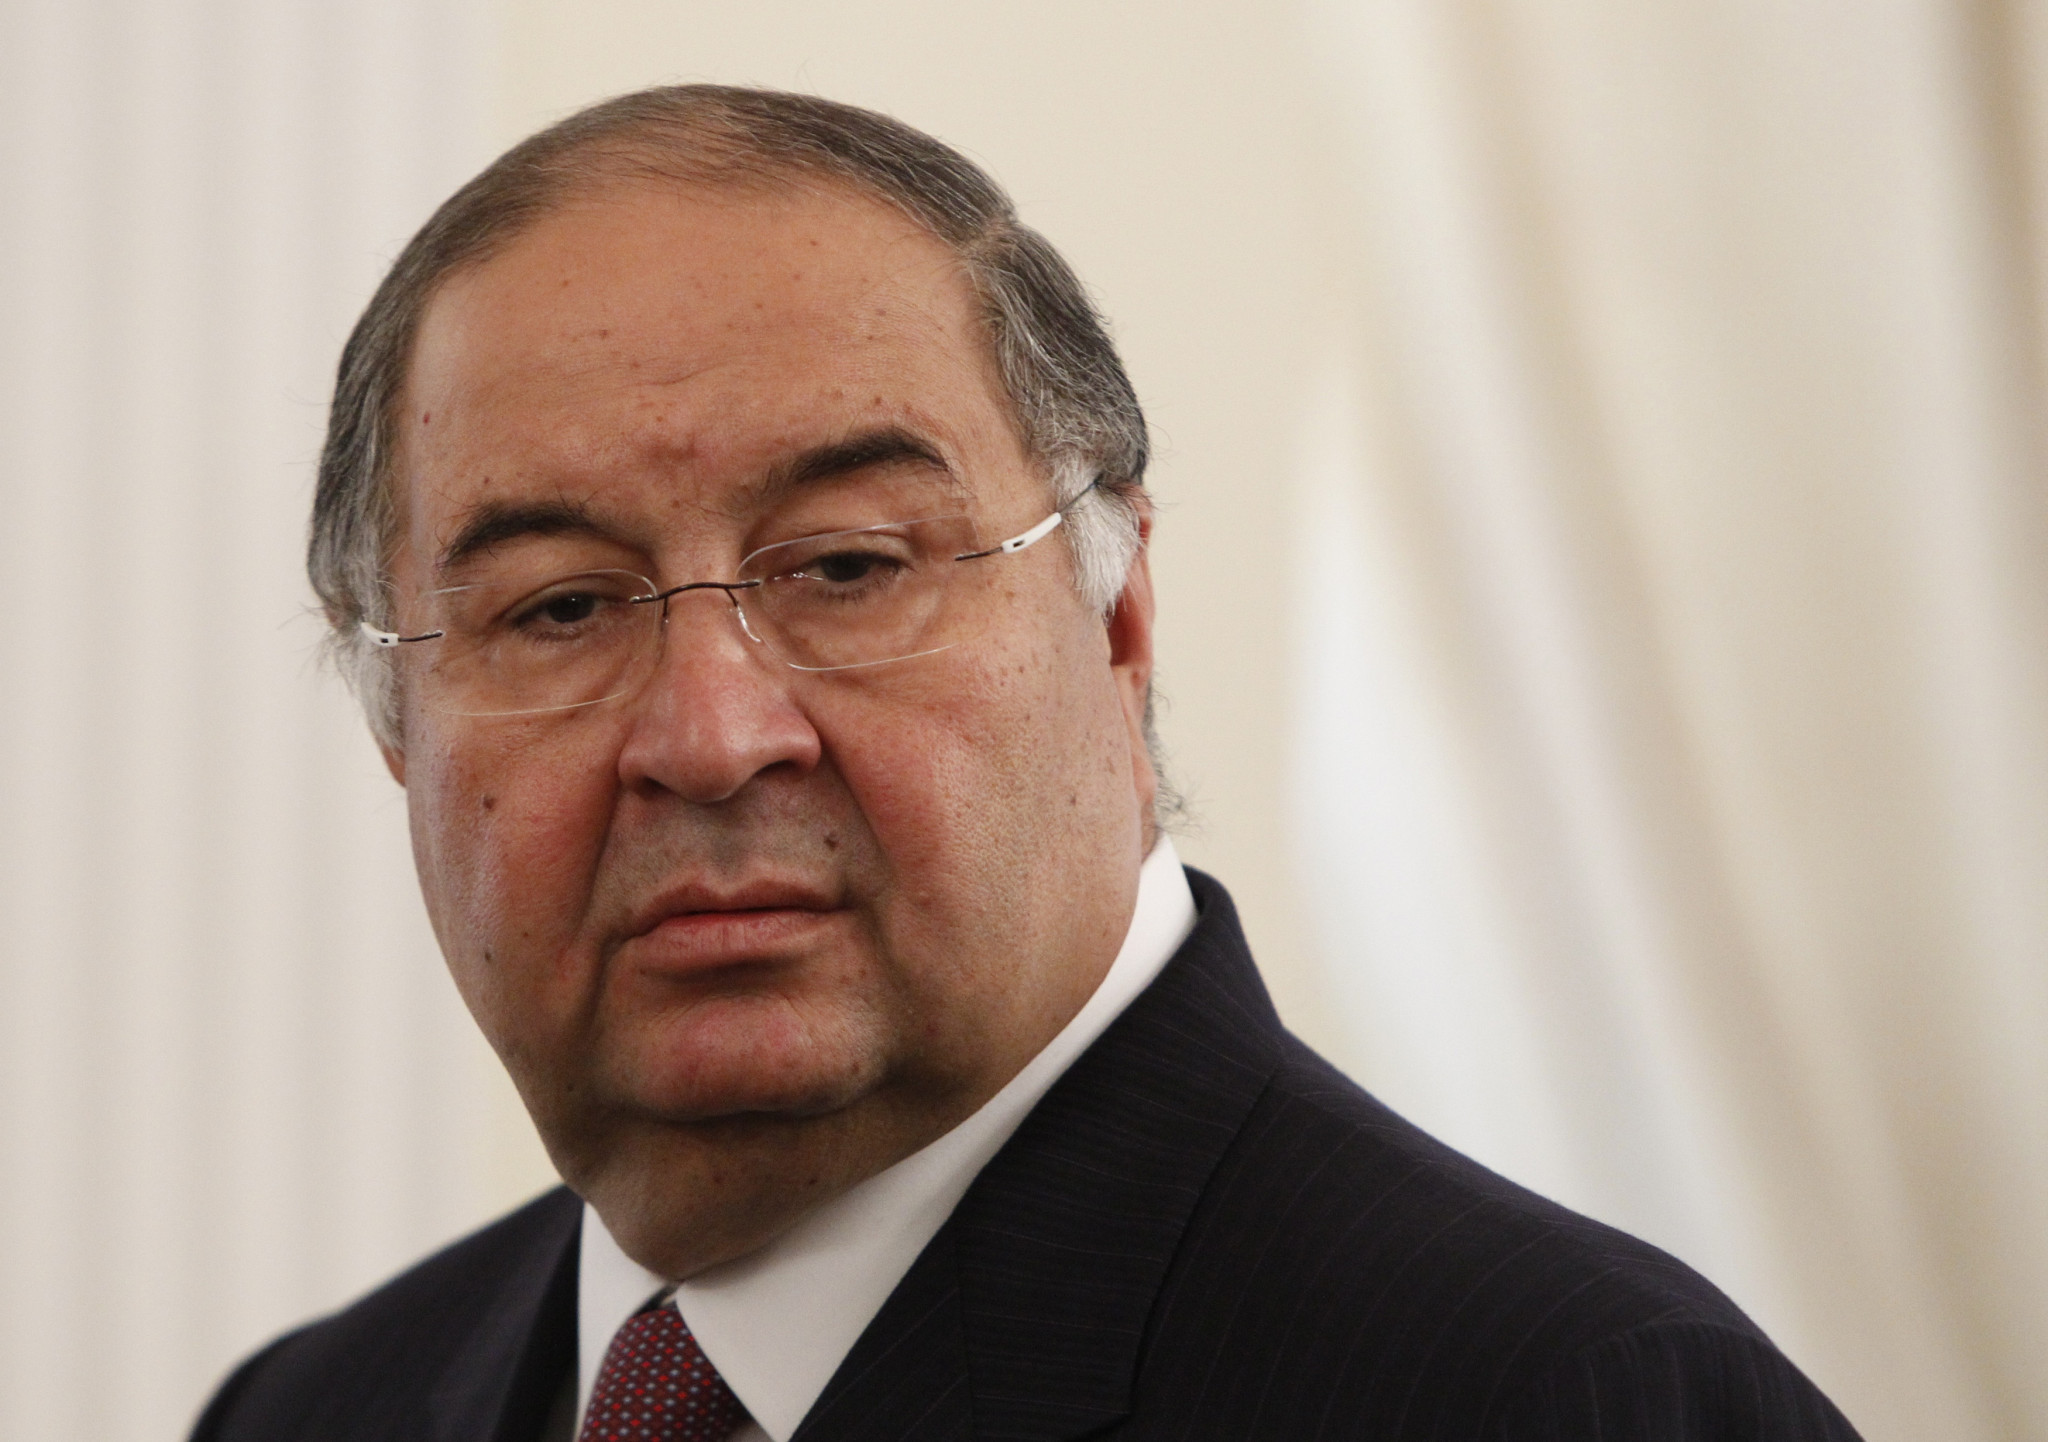 Usmanov pledges to increase fencing's popularity at FIE Congress